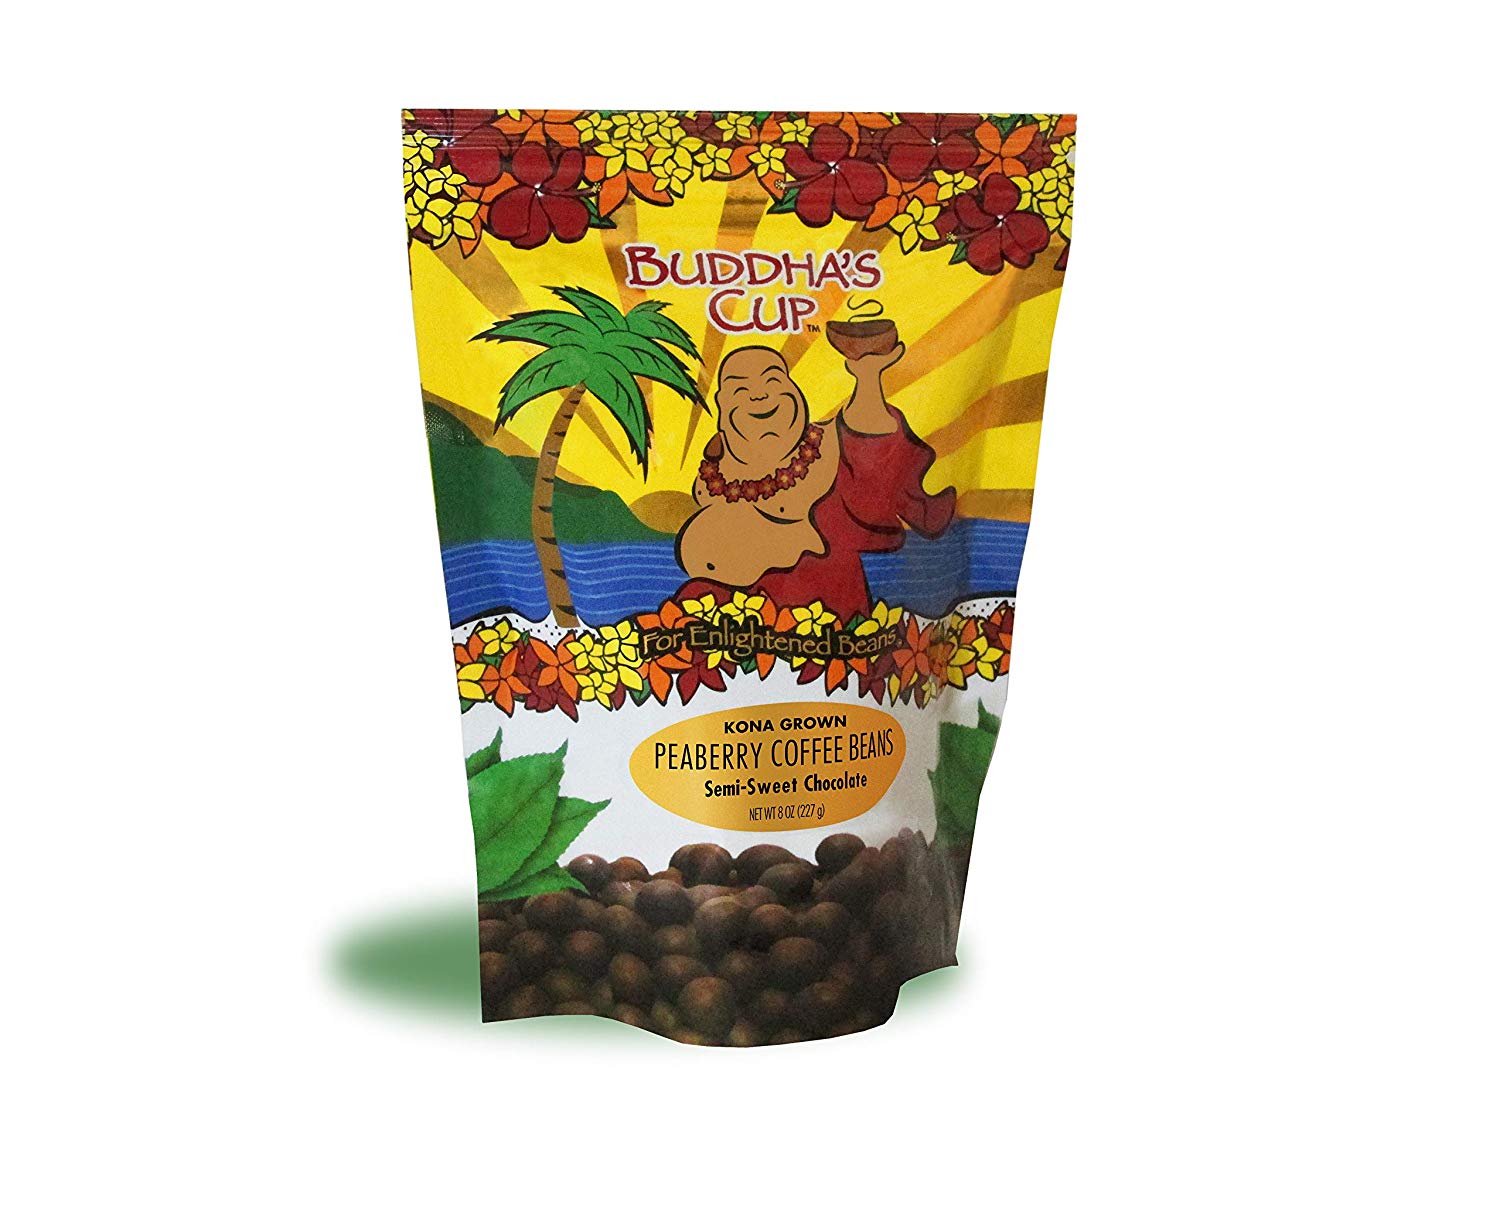 Chocolate Covered Coffee Beans by Buddha's Cup